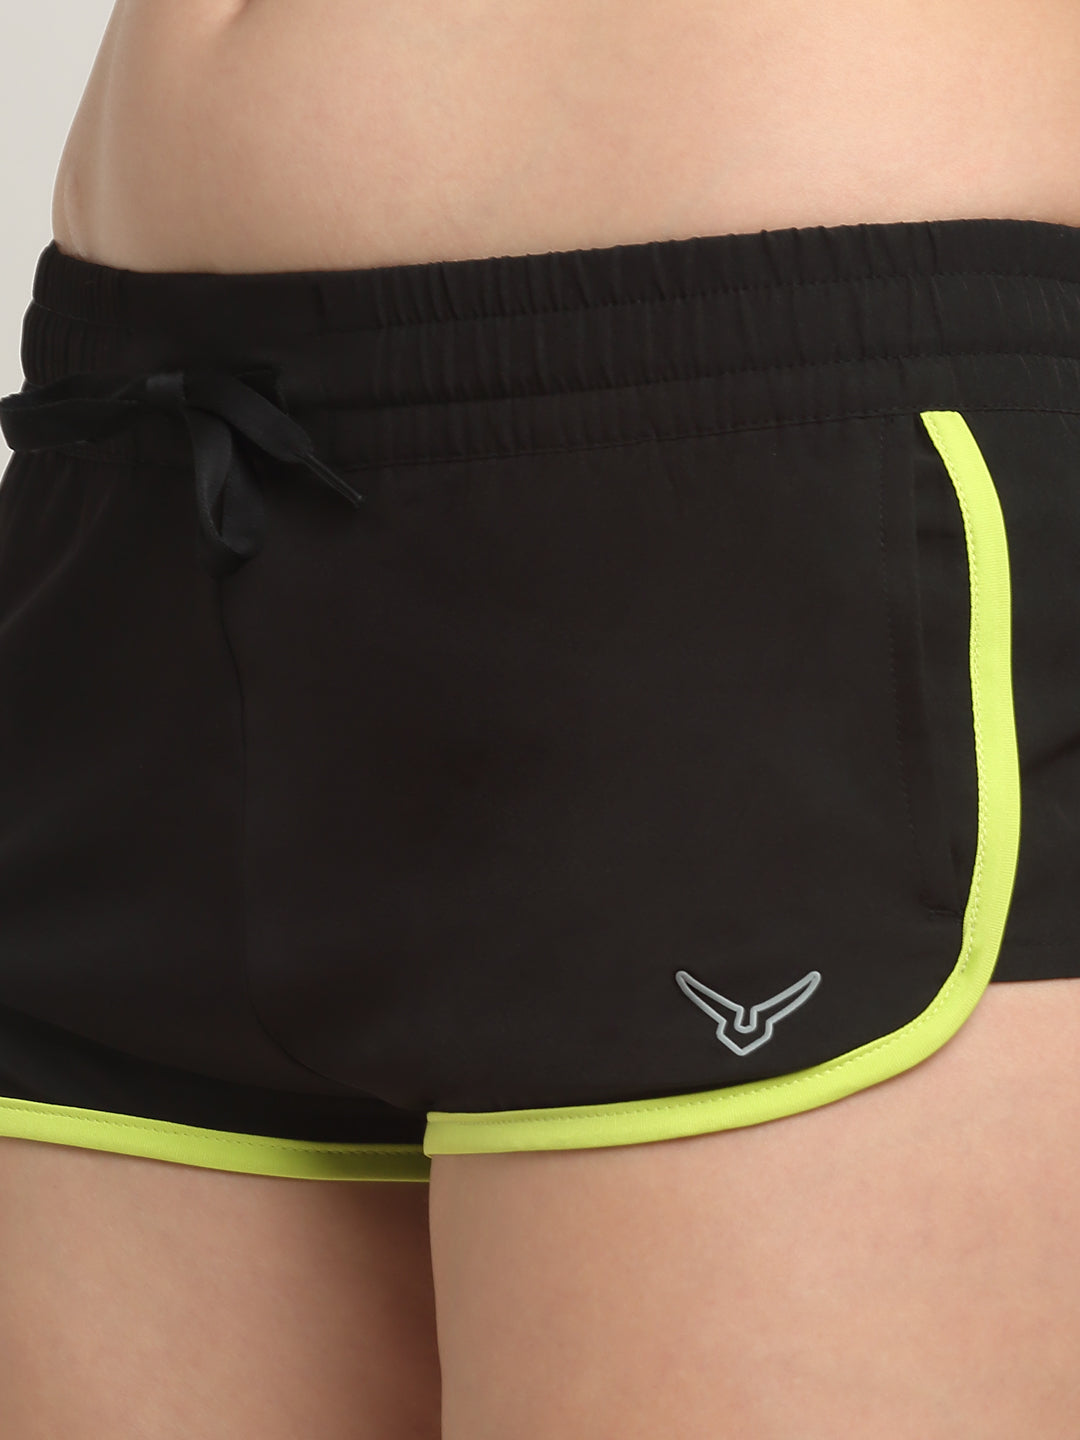 Invincible Women's Feather Weight Stretch Running Short